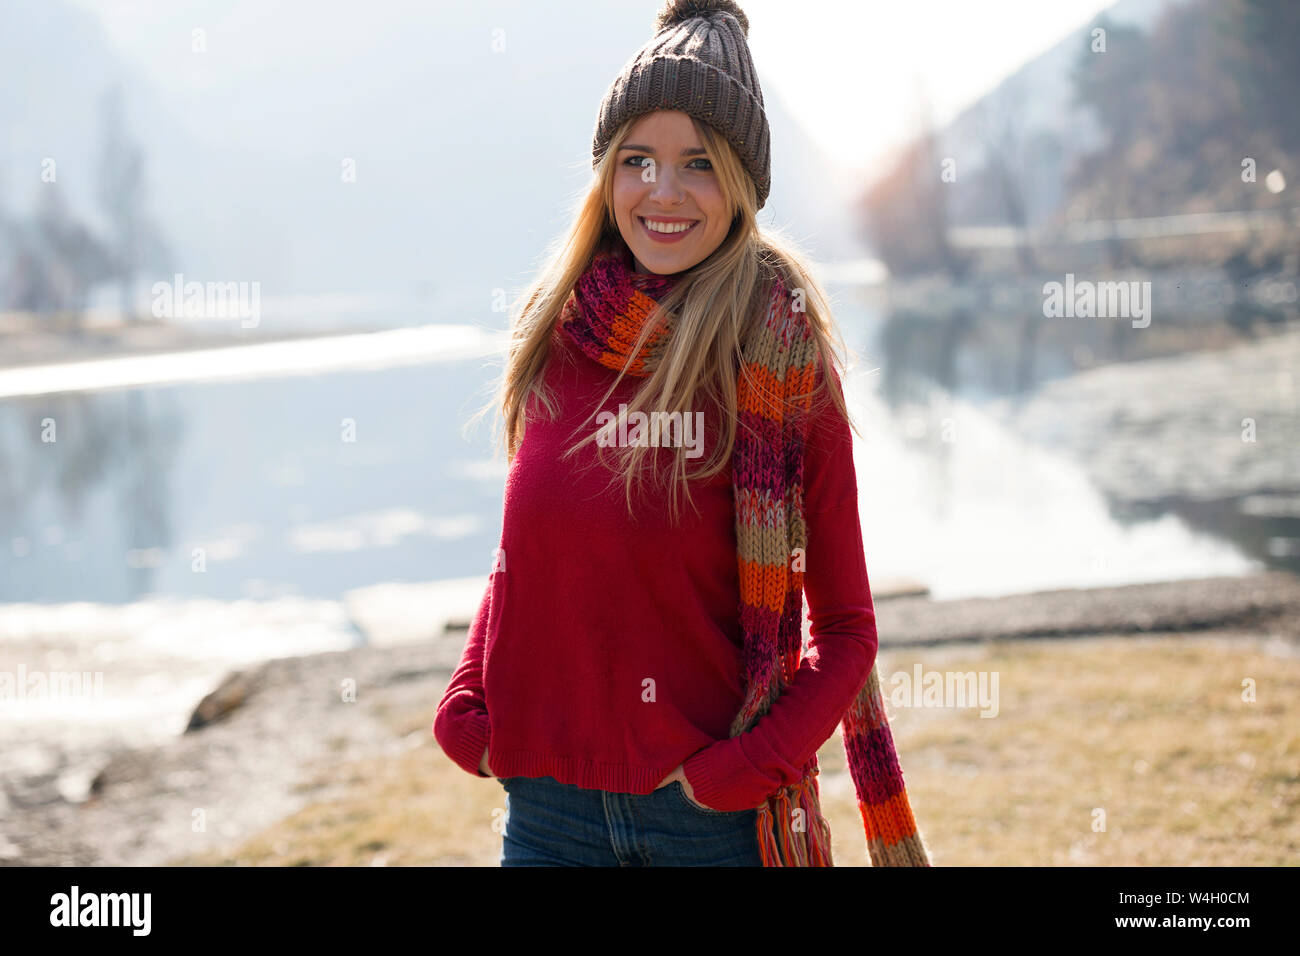 Young blond woman at a lake in winter Stock Photo